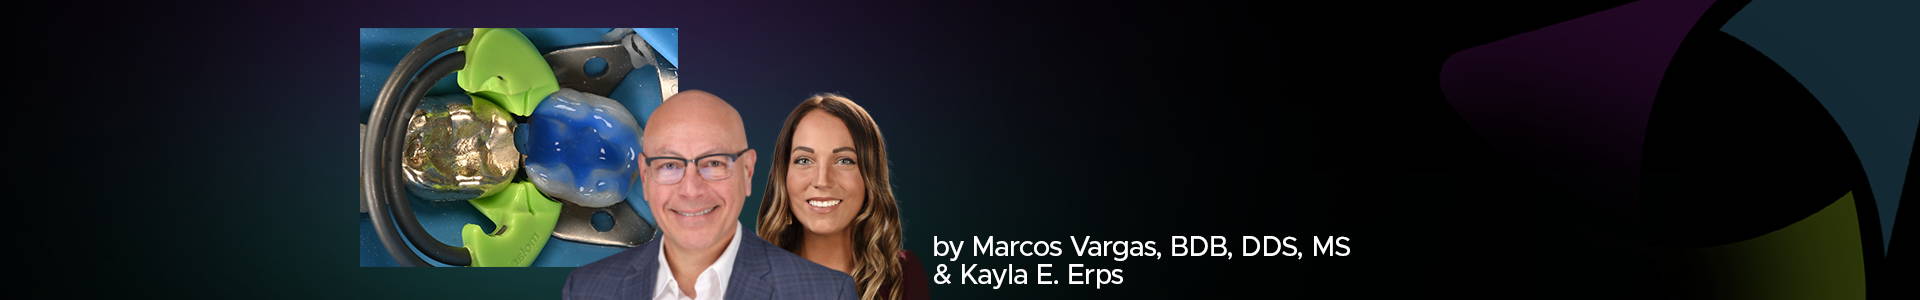 banner featuring Dr MArcos vargas and Kayla Erps, plus clinical image